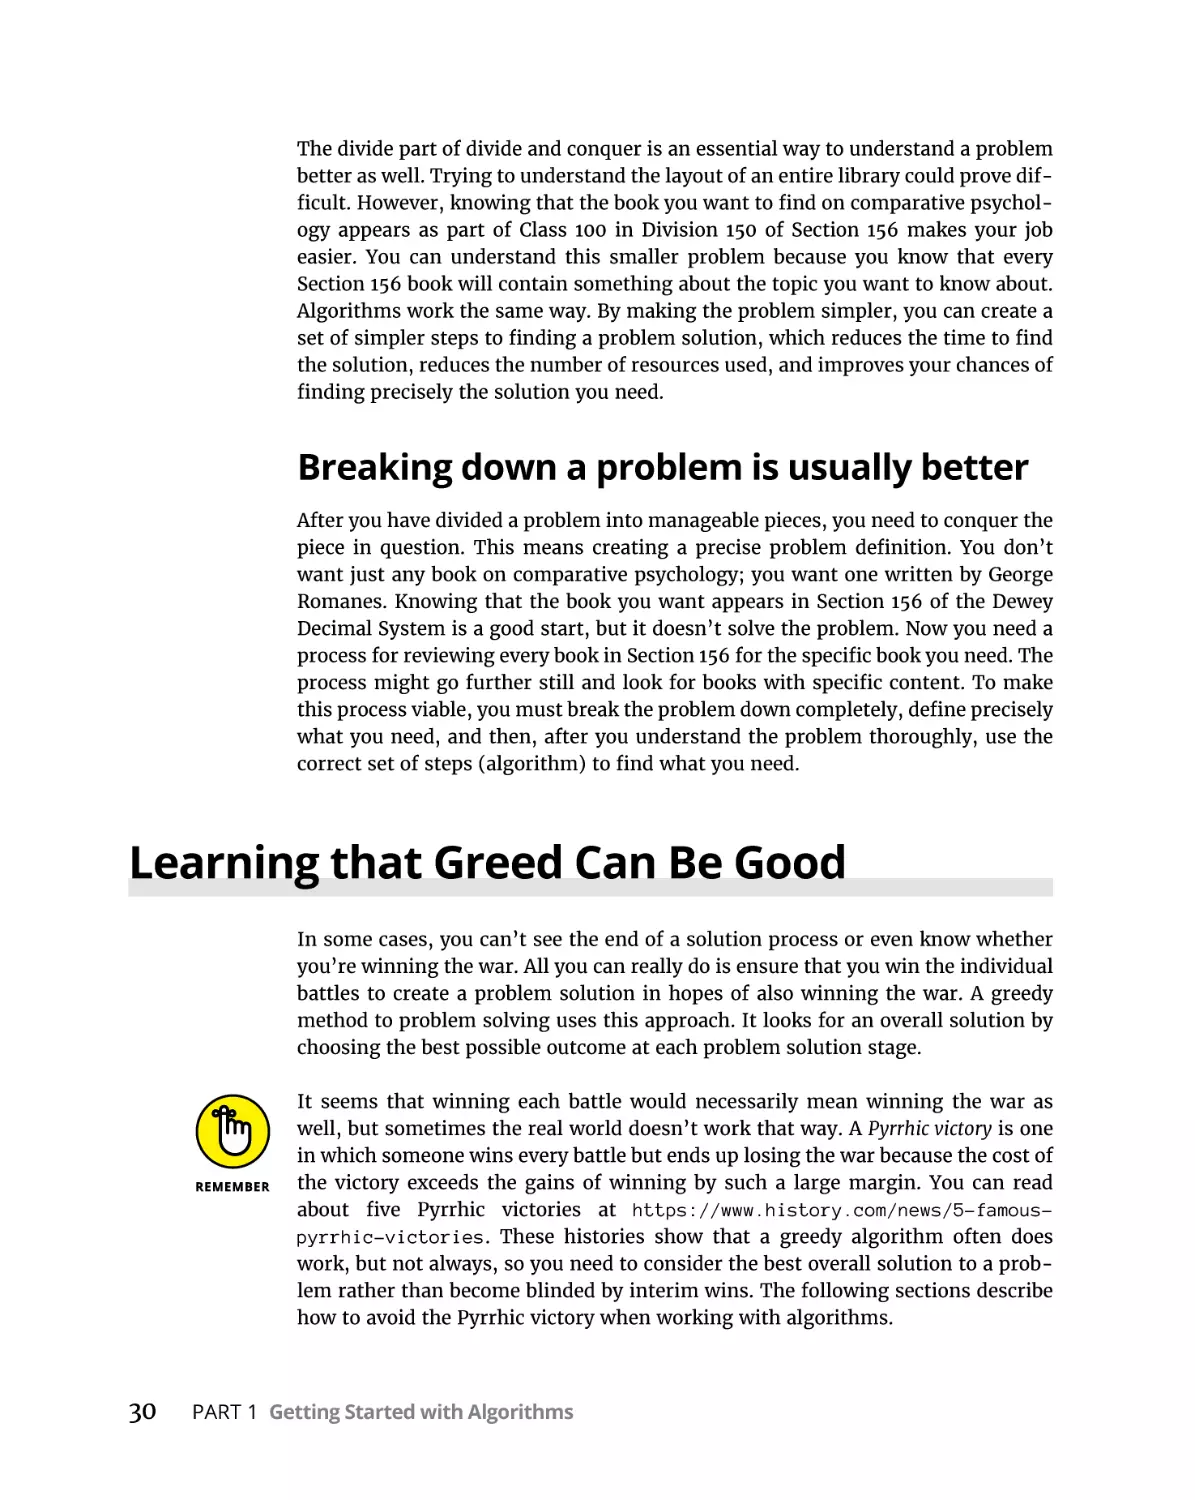 Breaking down a problem is usually better
Learning that Greed Can Be Good